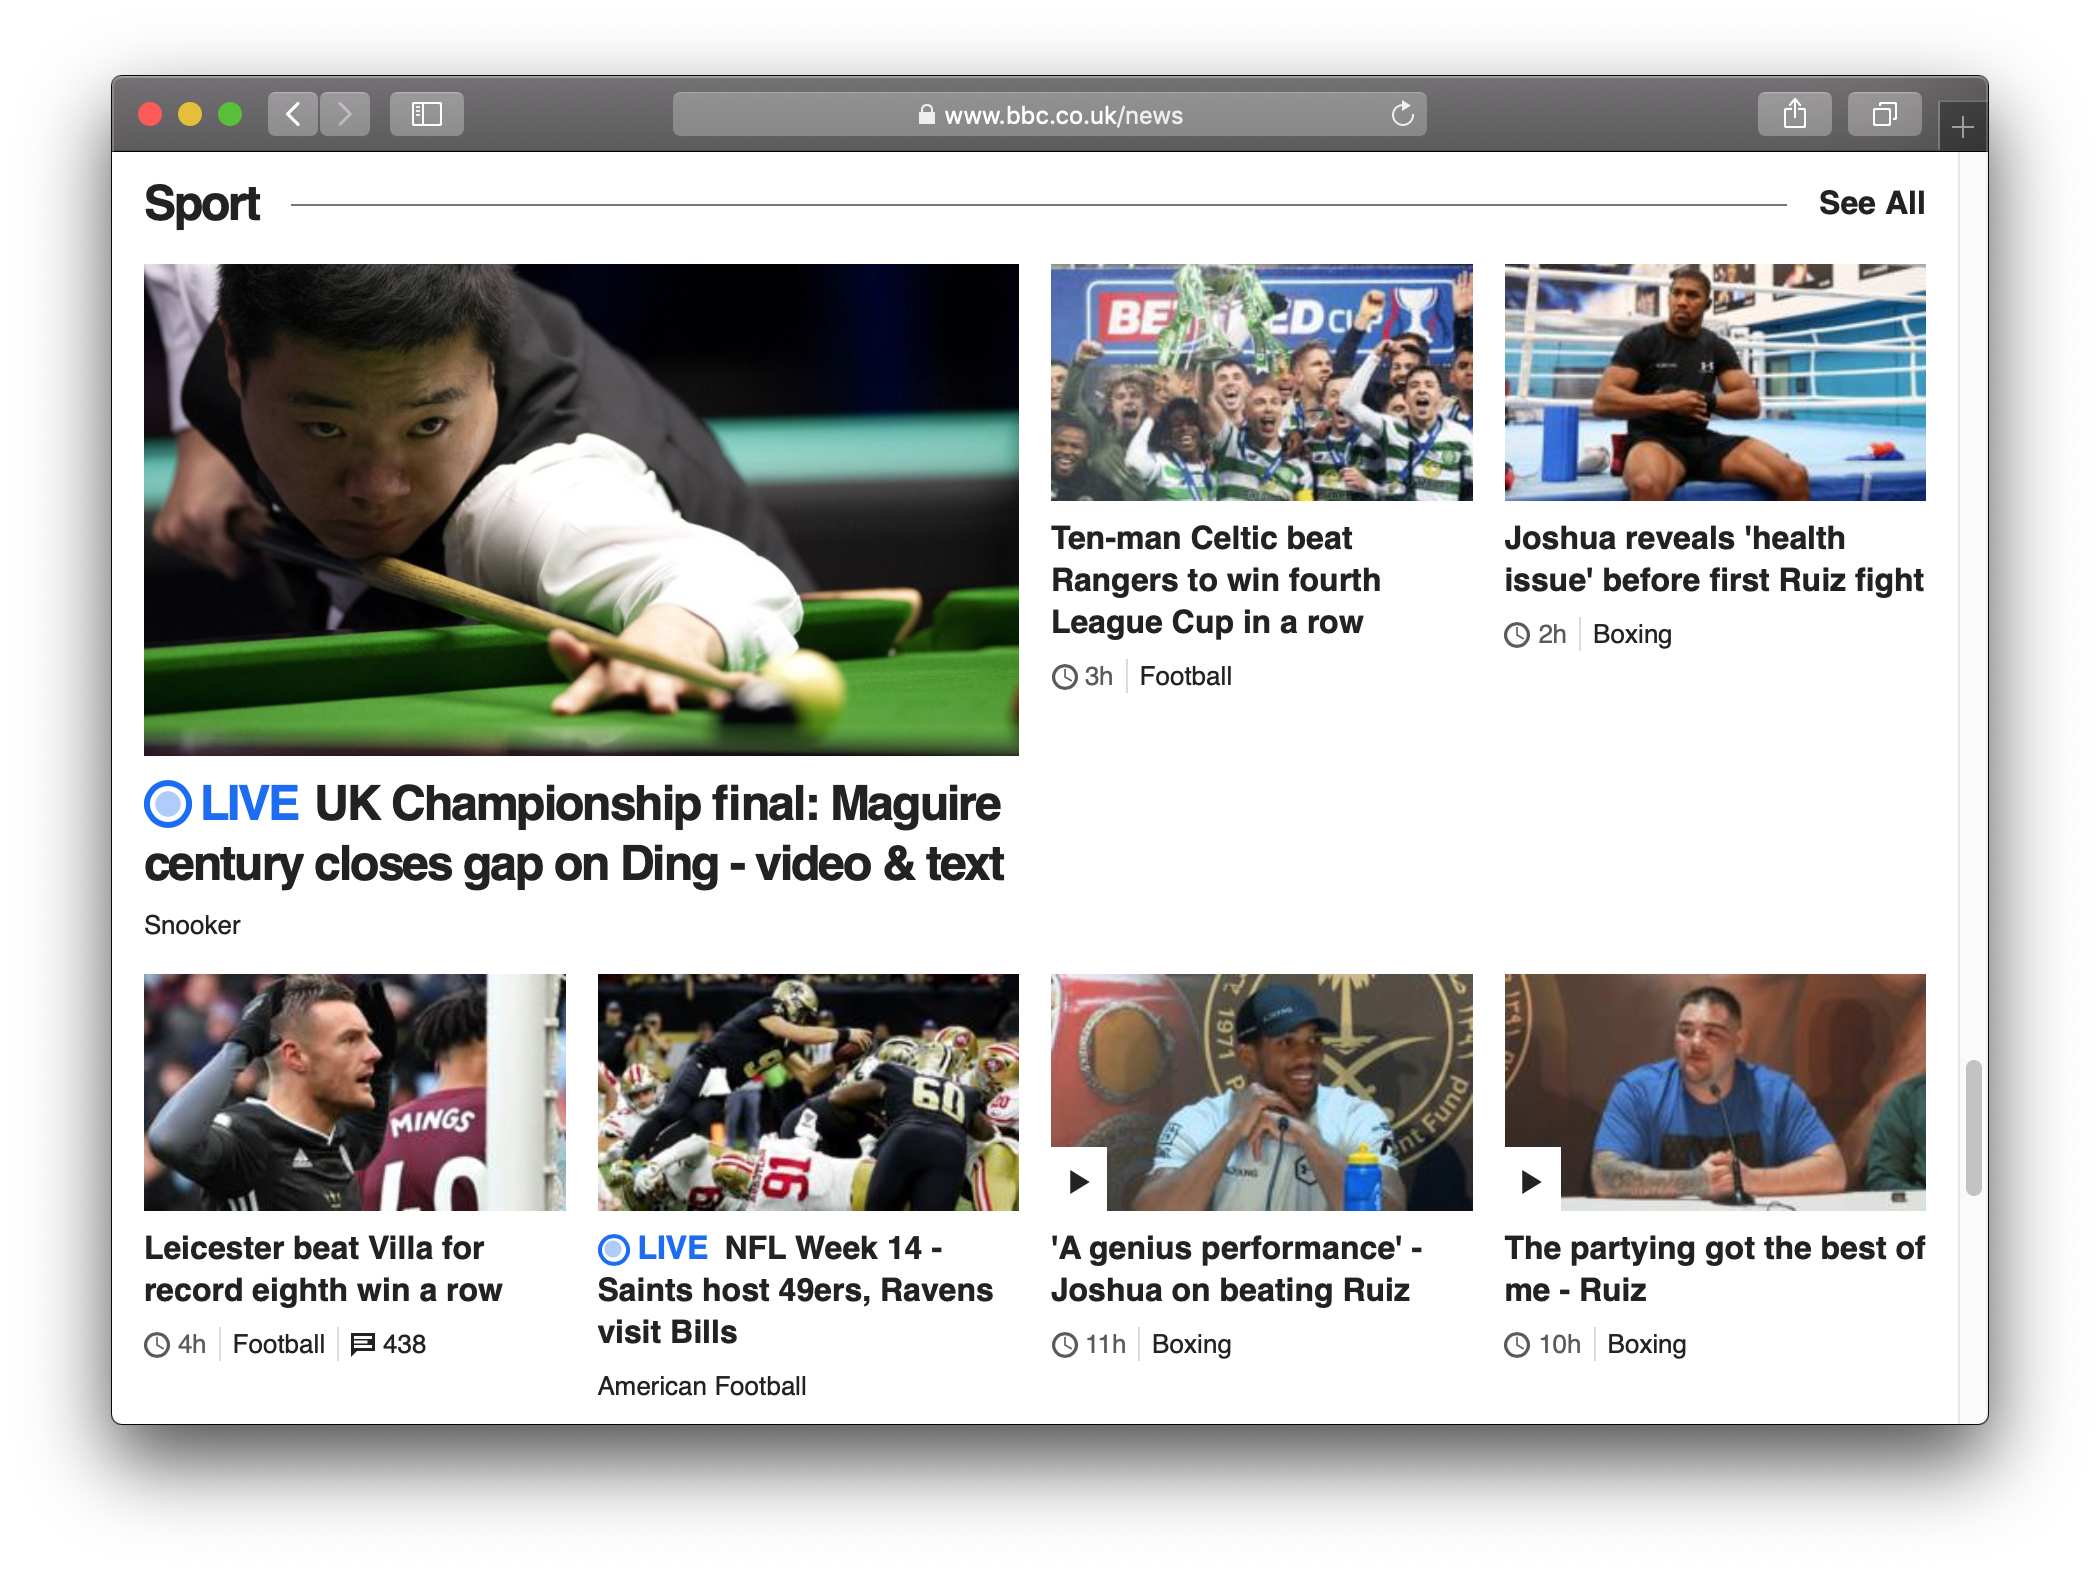 The sports section of the BBC News home page showing several images of athletes.